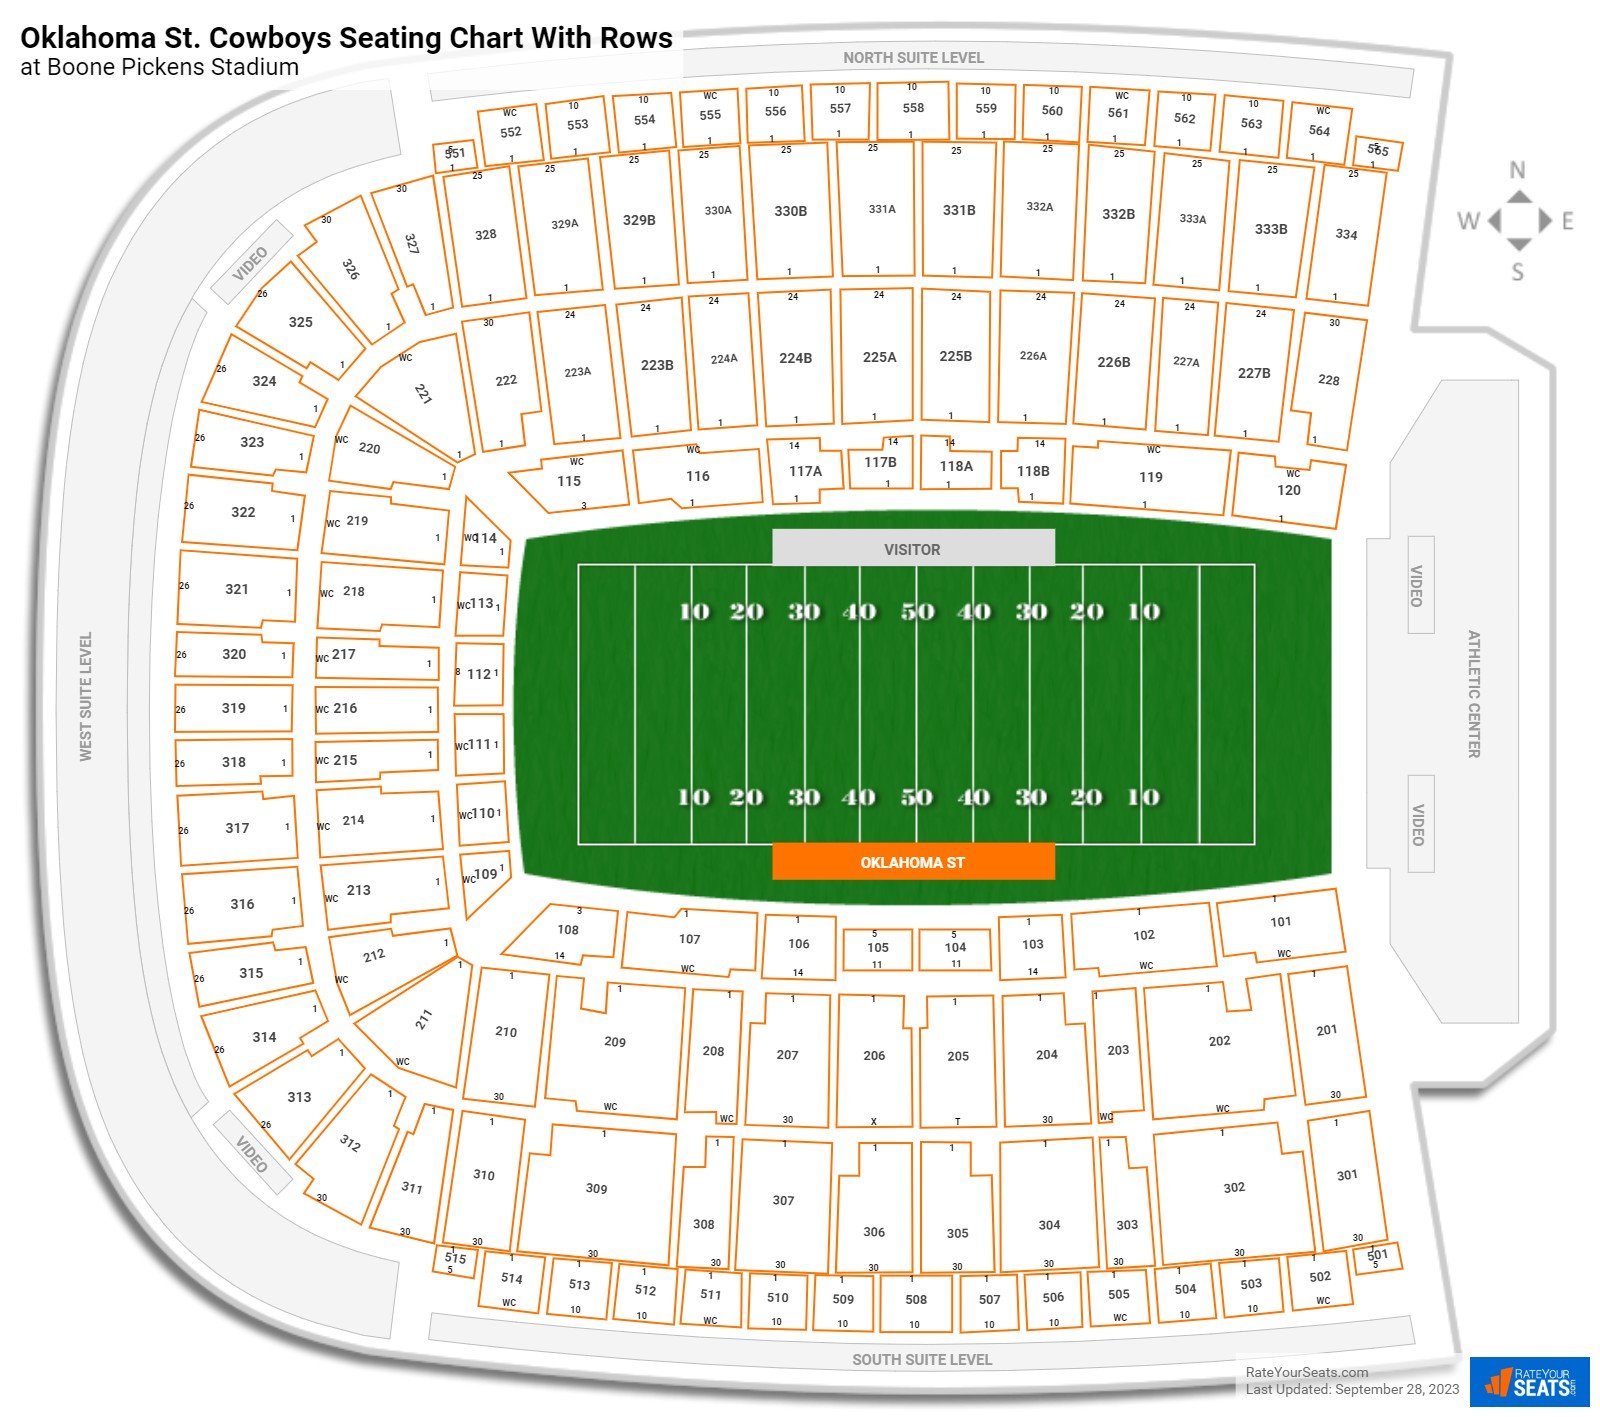 Boone Pickens Stadium seating chart with row numbers